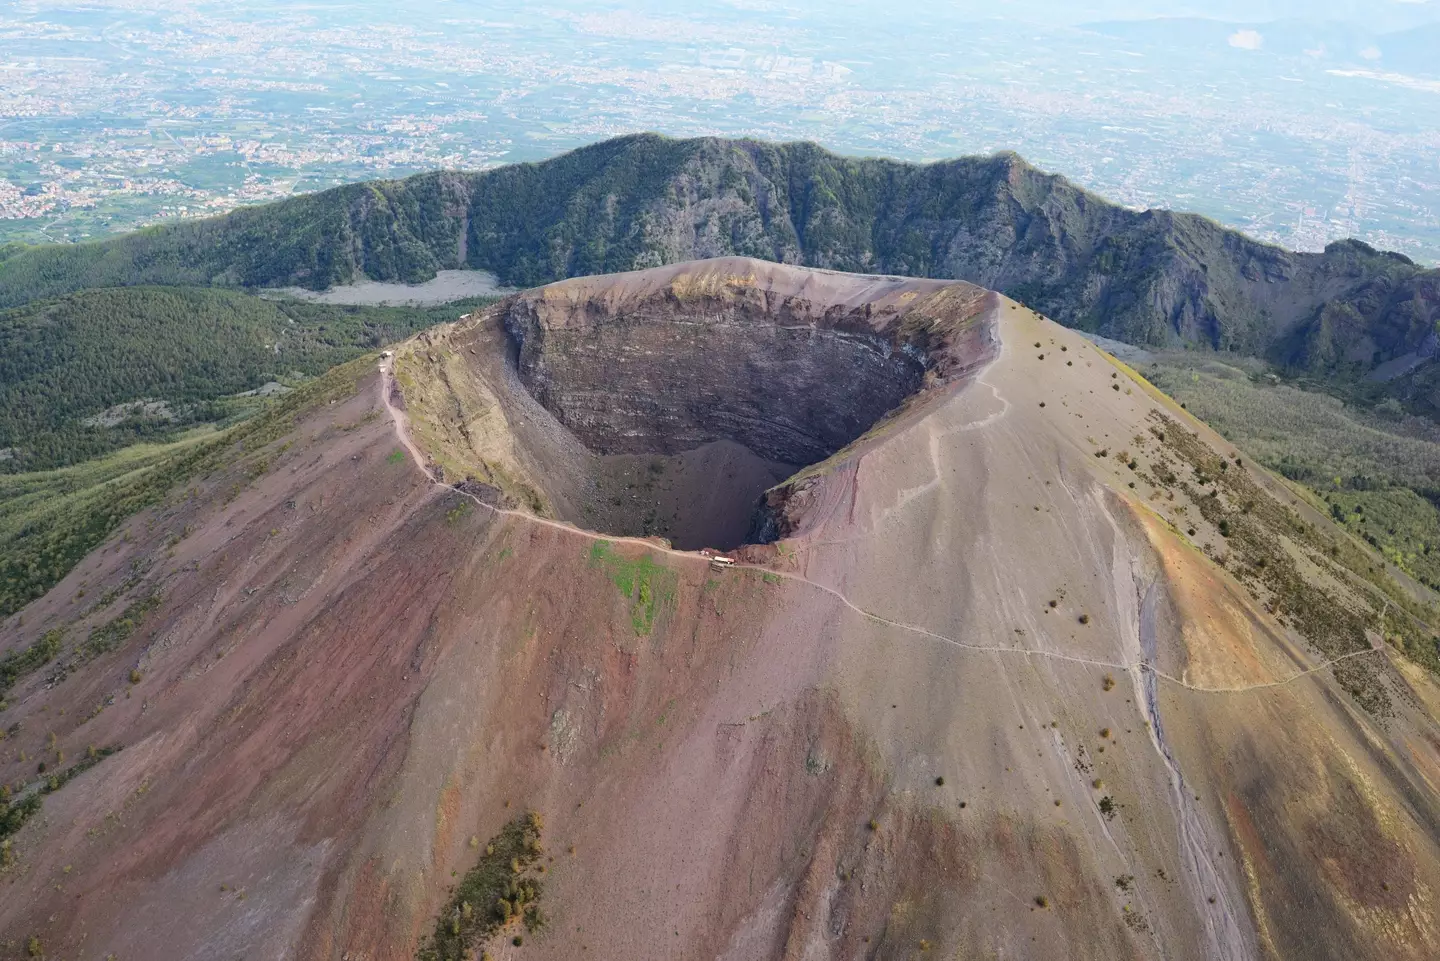 The top of the volcano is being nicknamed 'the quietest place on Earth'.